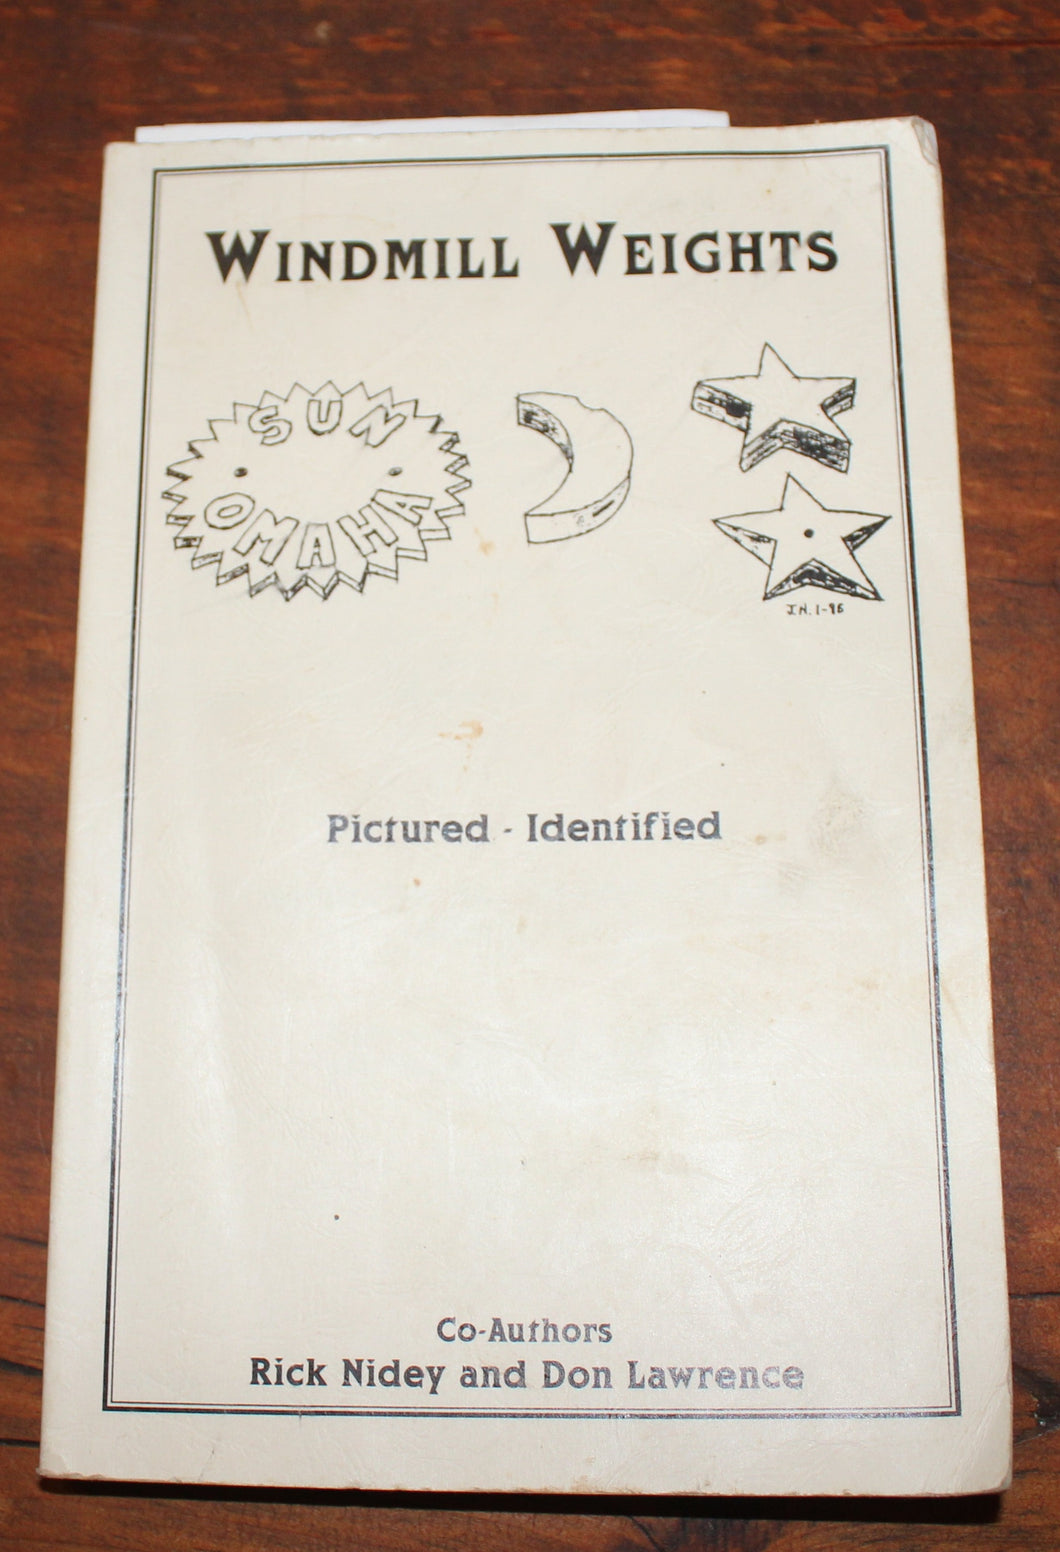 Windmill Weights by Rick Nidey and Don Lawrence